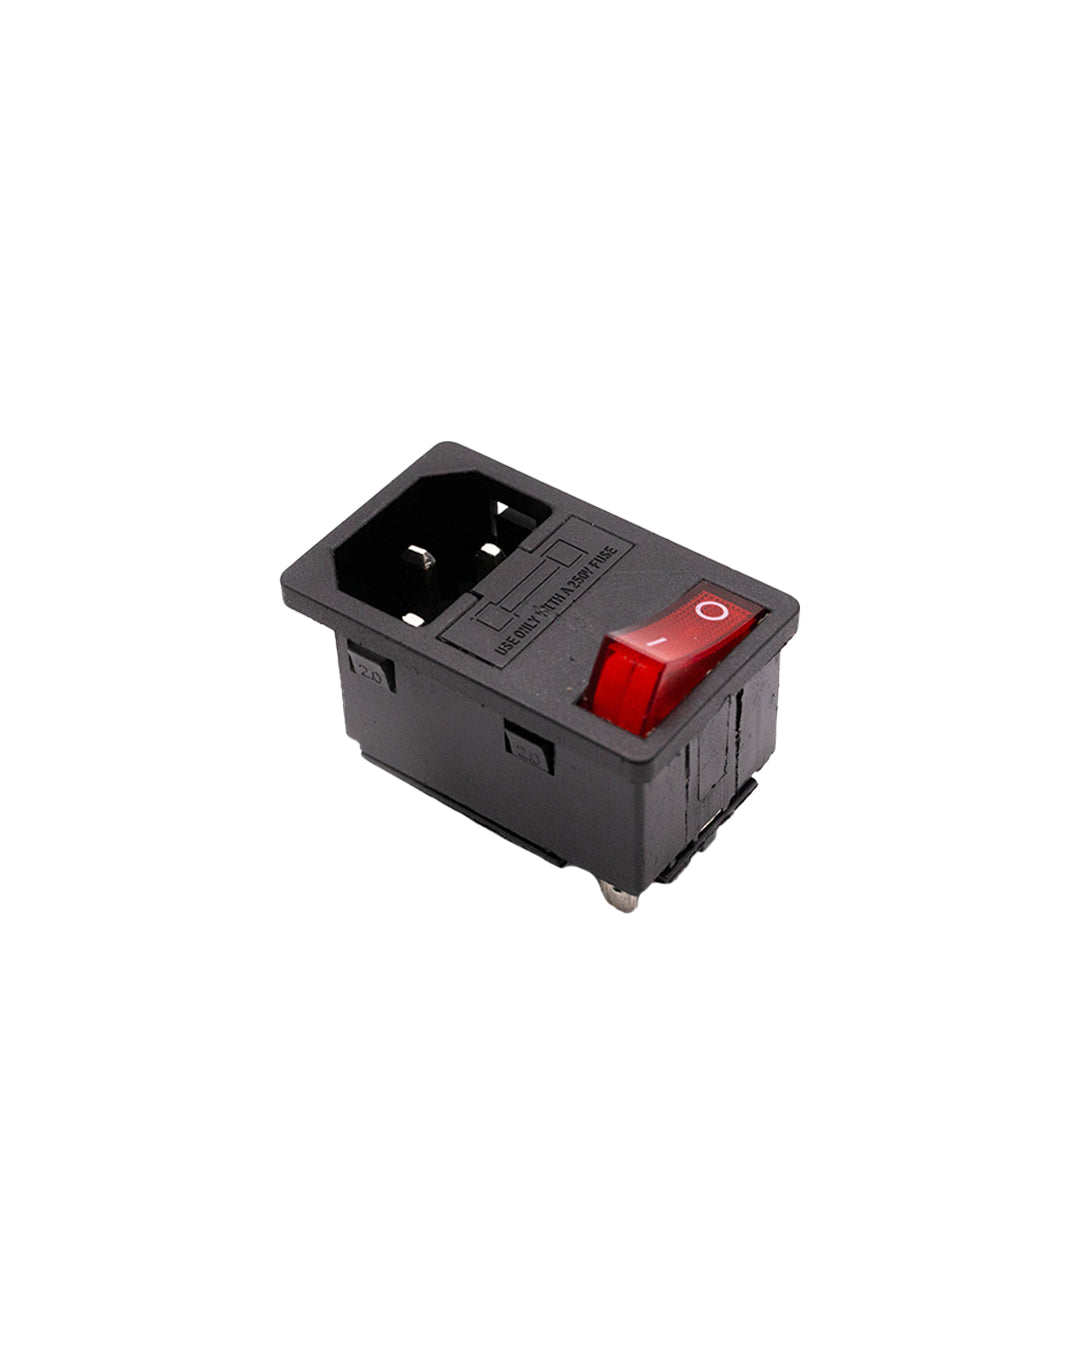 CP800 parts - IEC Socket Switch - CPE10 *Pre-Order